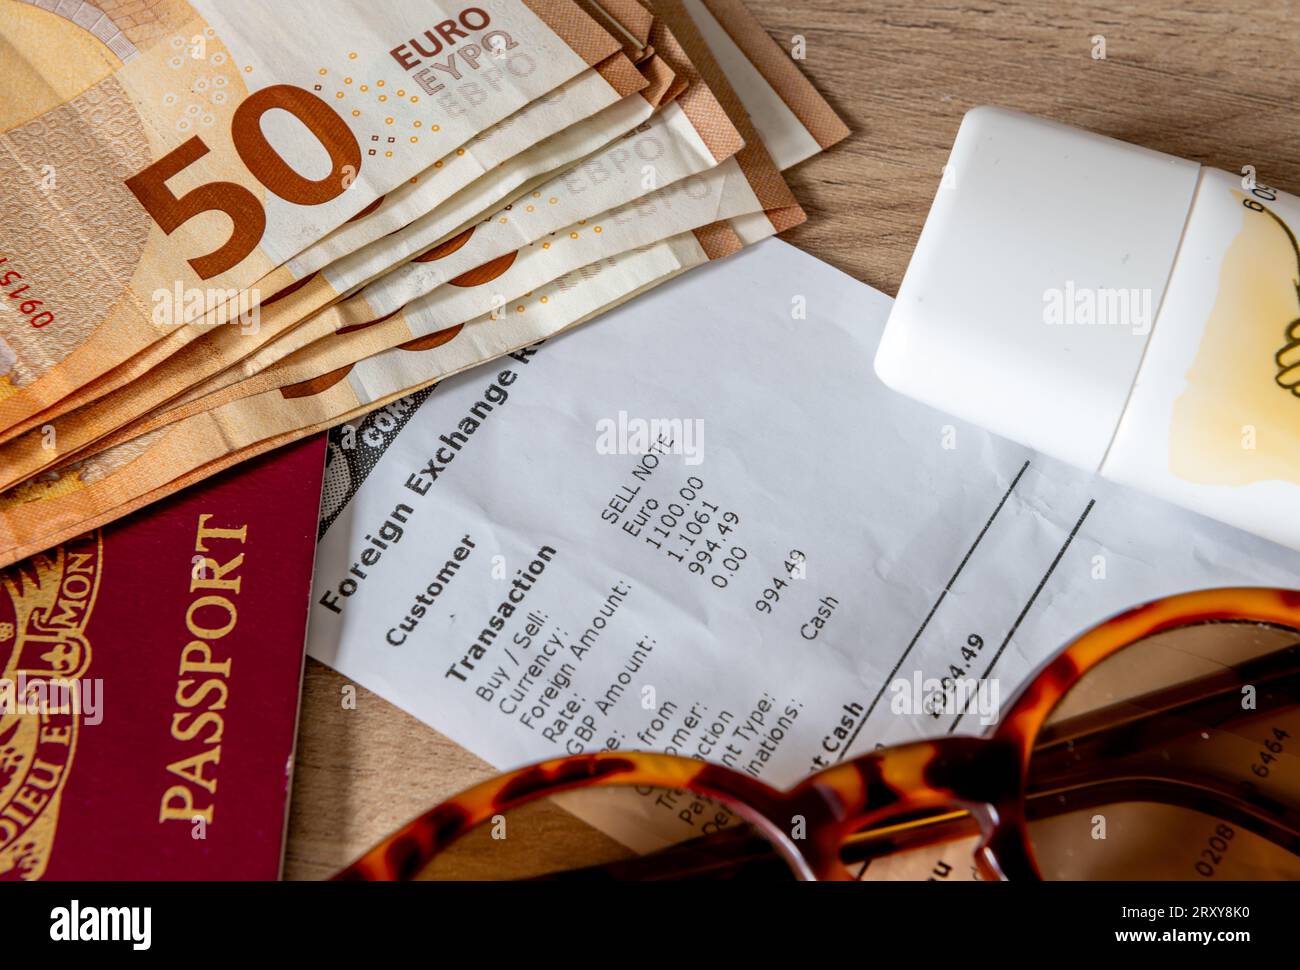 A travel money, holiday and money exchange concept with Euro bank notes, a passport, sun cream and sunglasses on top of a currency exchange receipt. Stock Photo